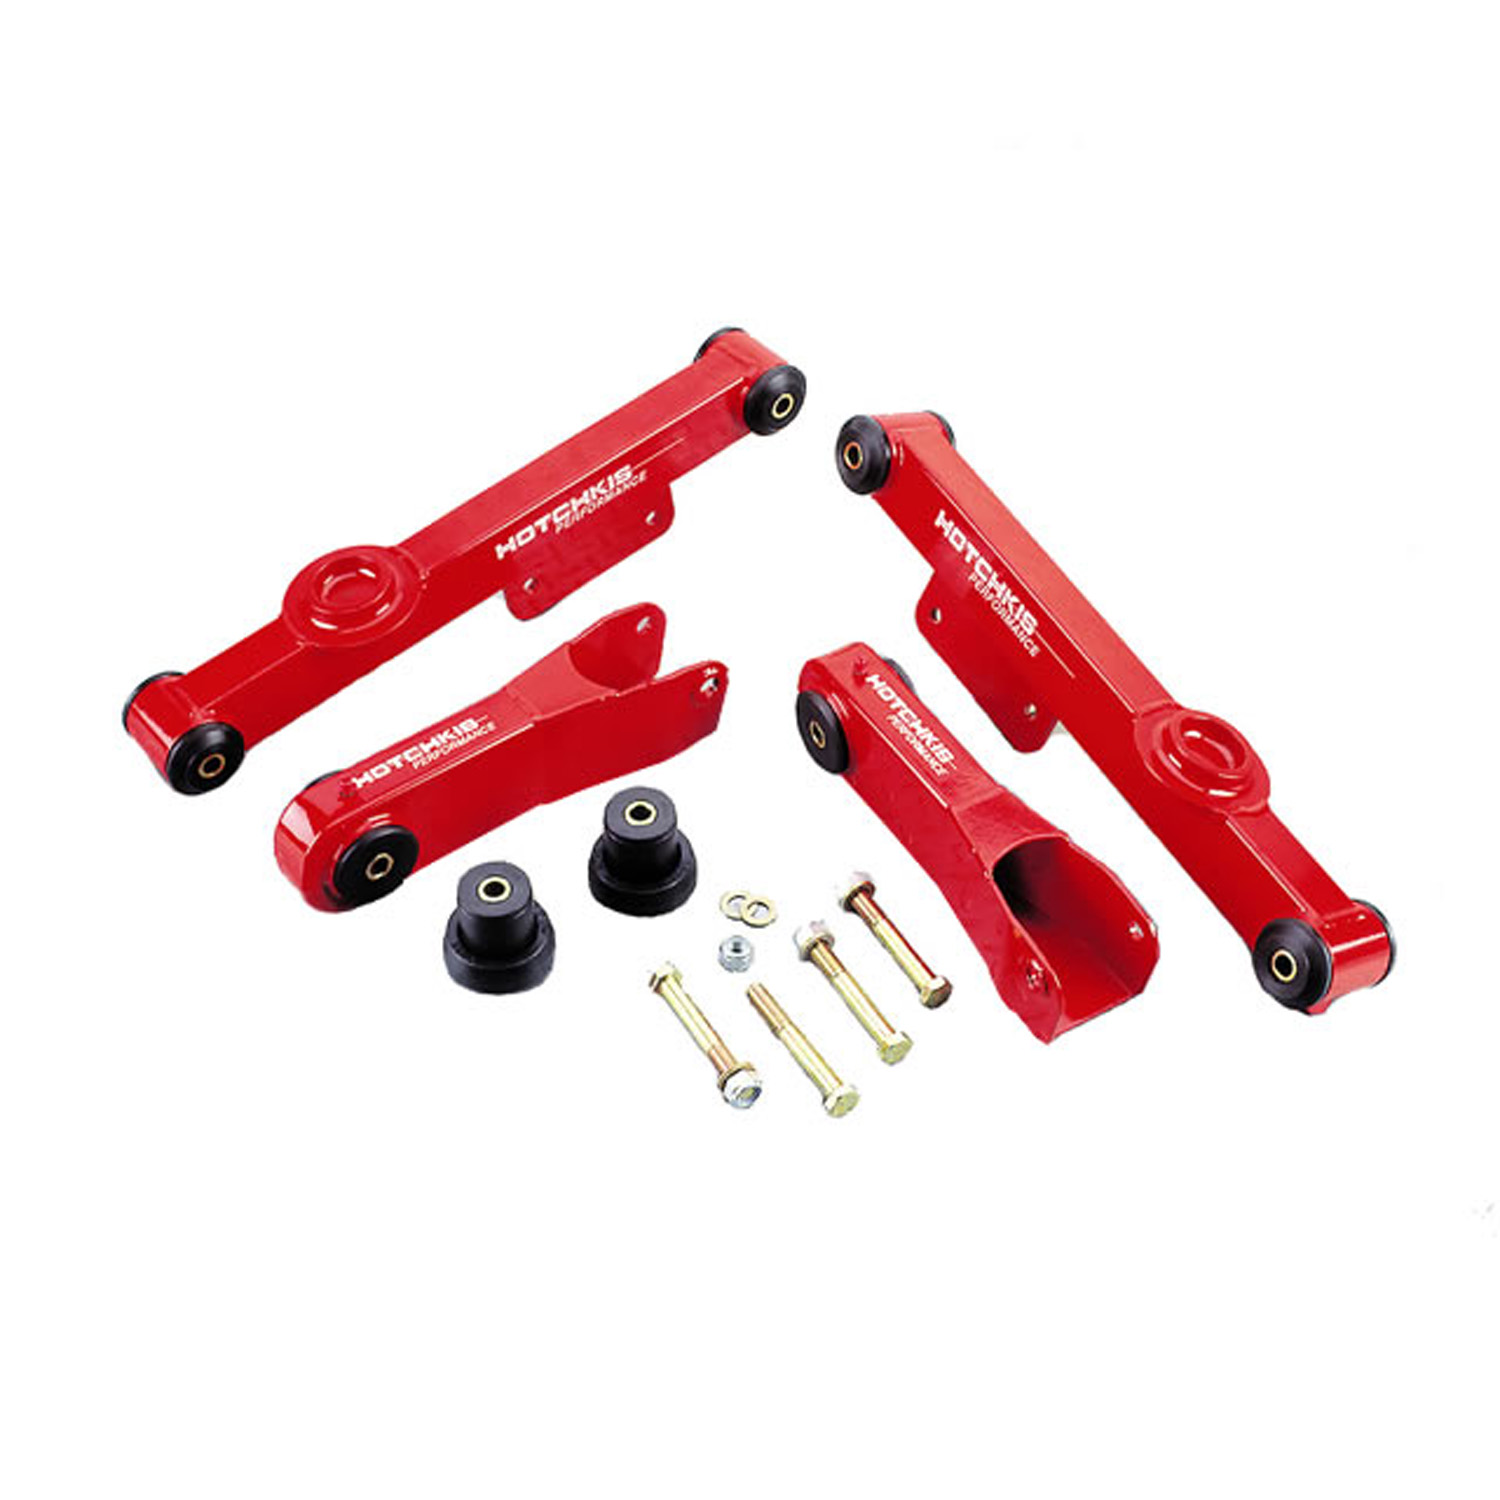 1979-98 Ford Mustang Hotchkis Suspension Rear Suspension Package - Red